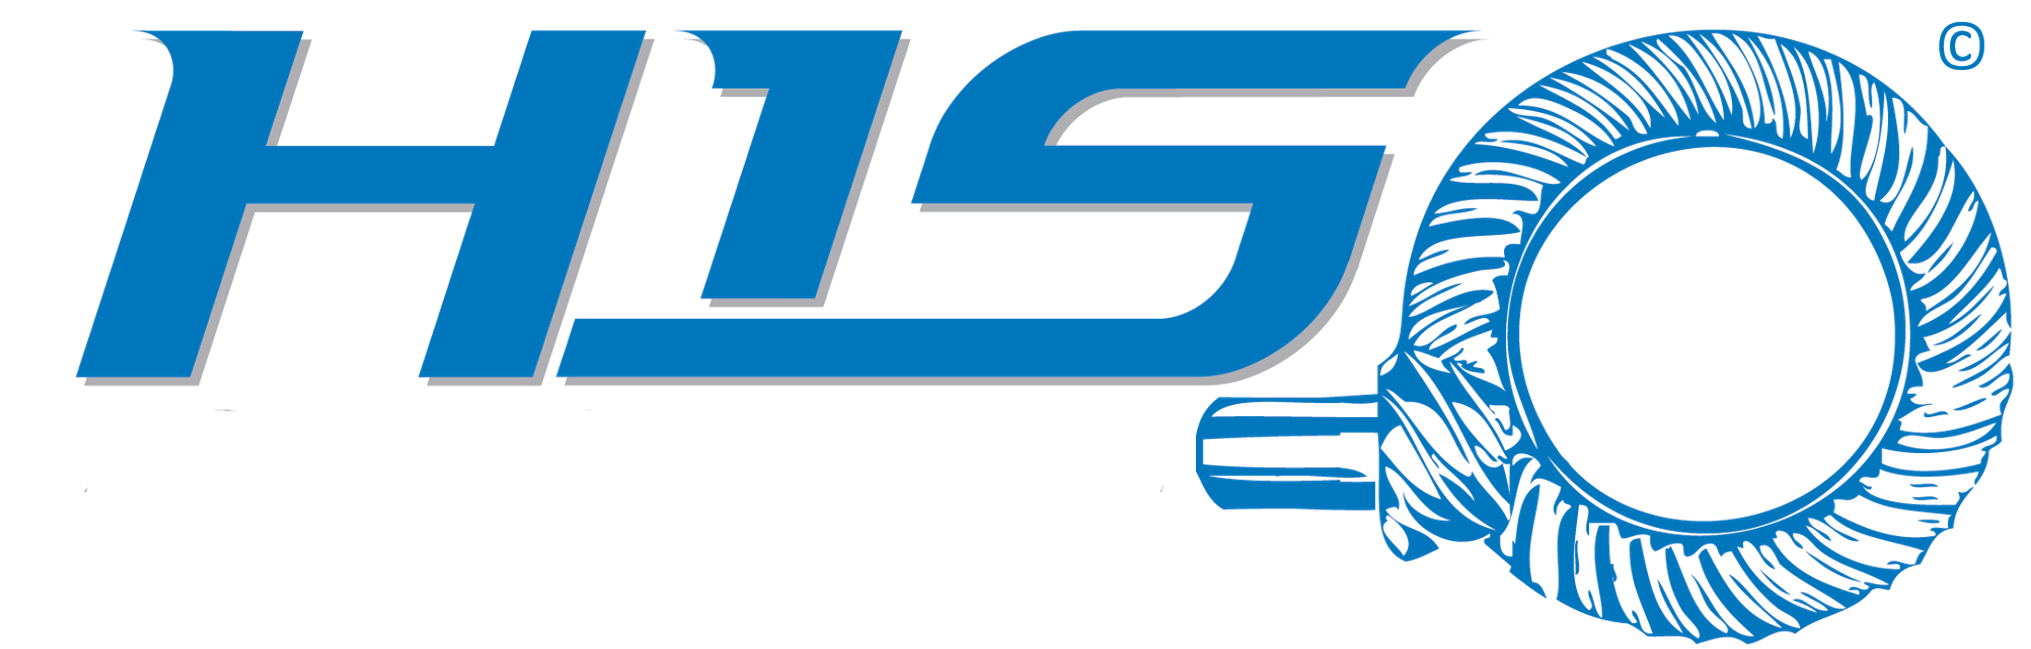 HIS-Industrieservice-Logo